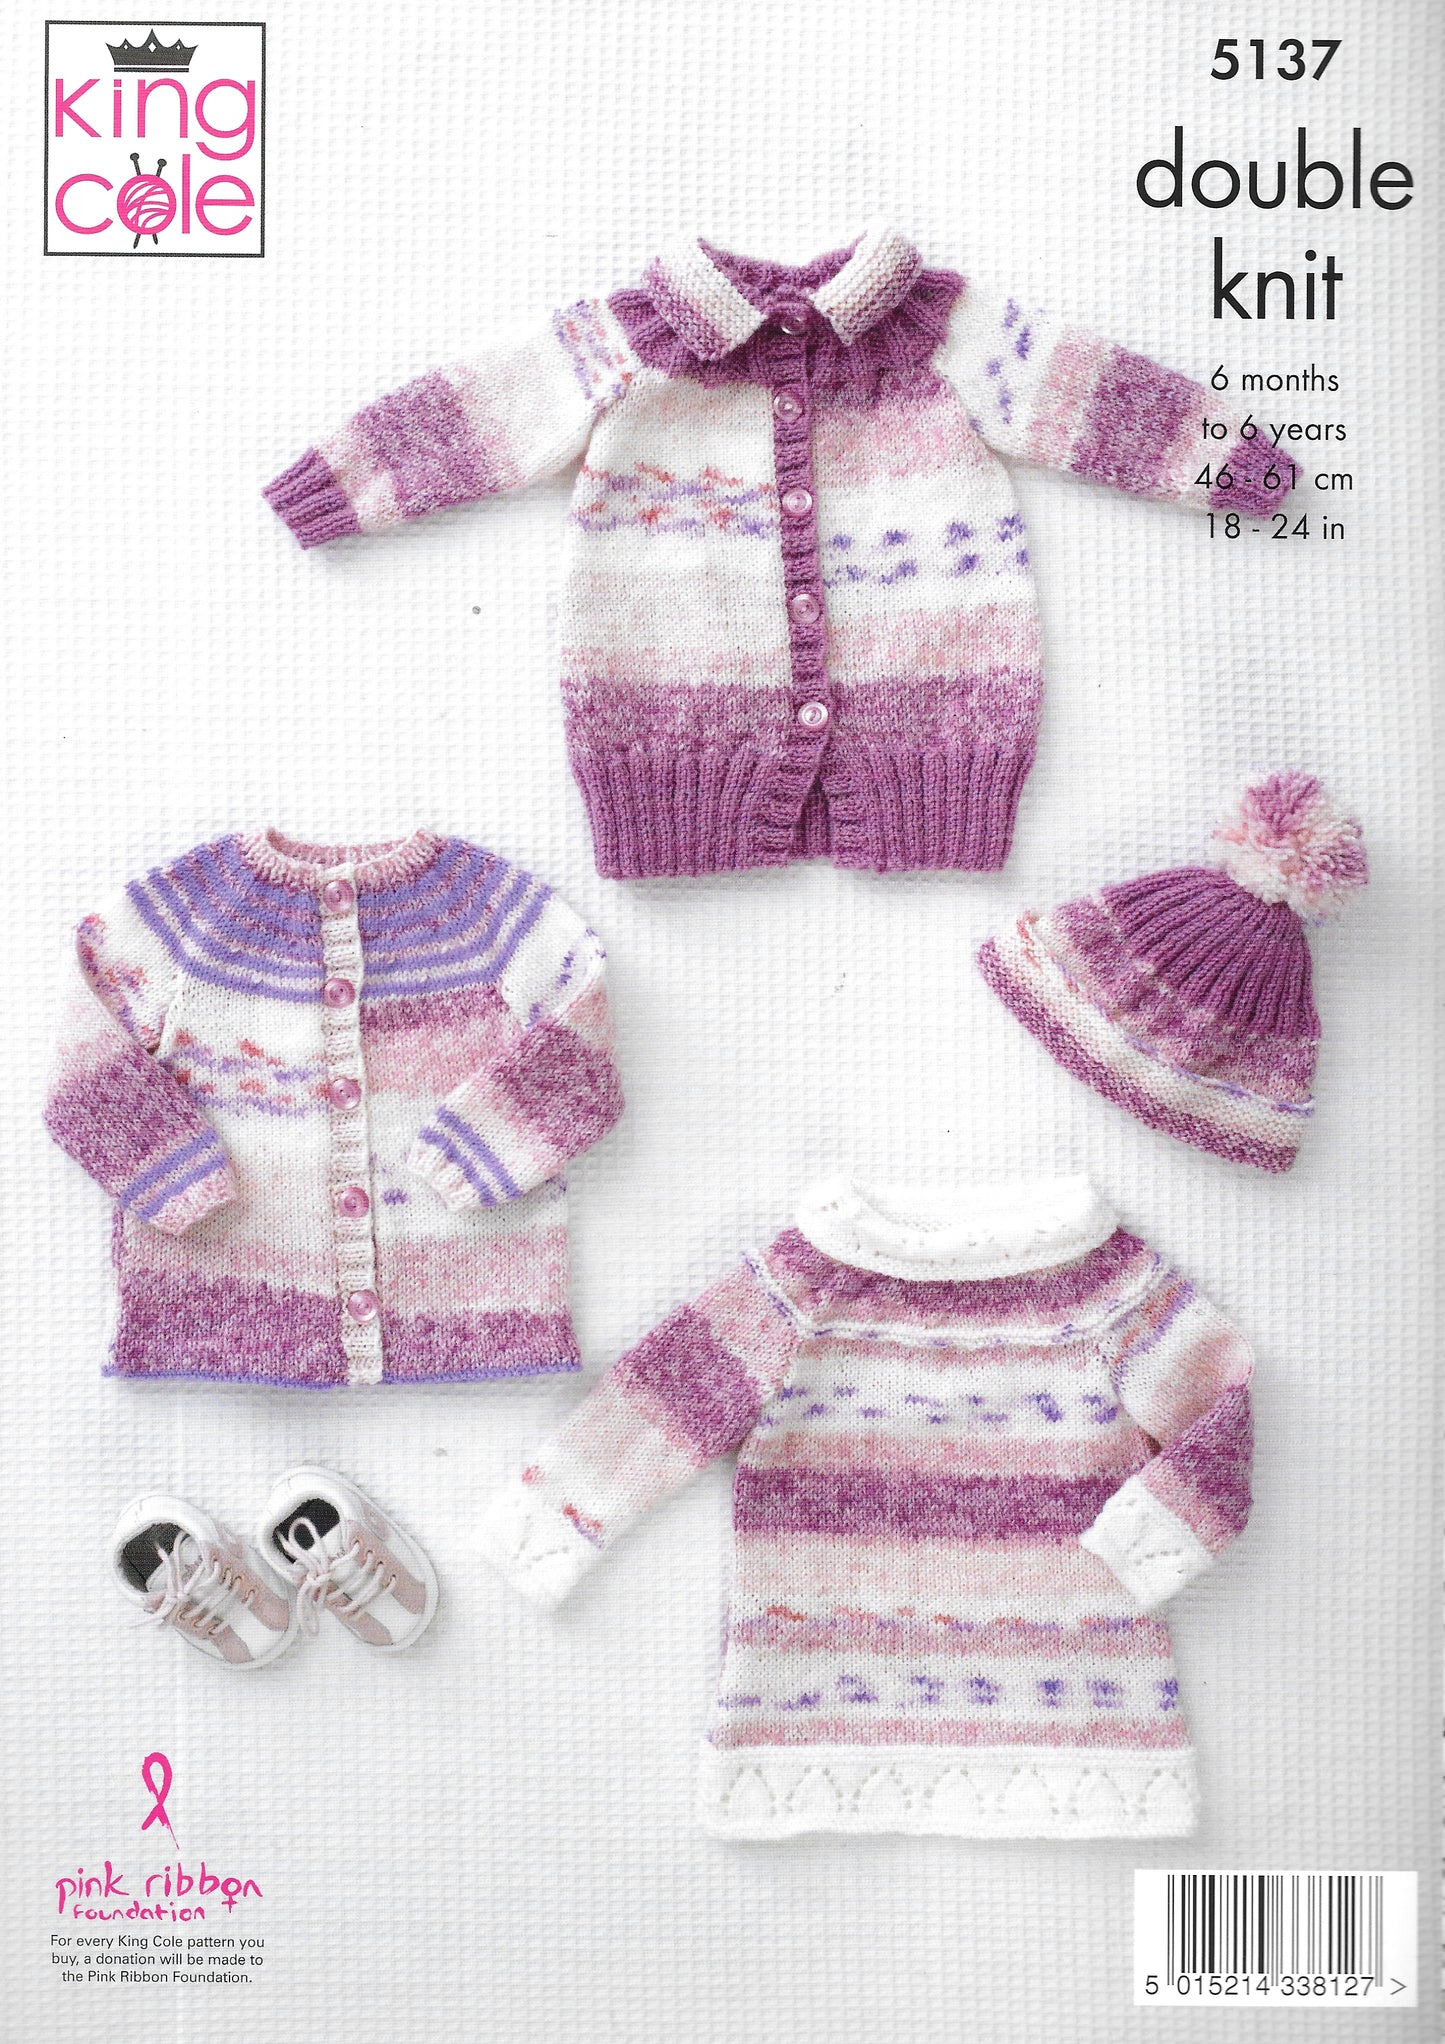 5137 King Cole double knit Cardigan, Coat, Tunic and Hat knitting pattern